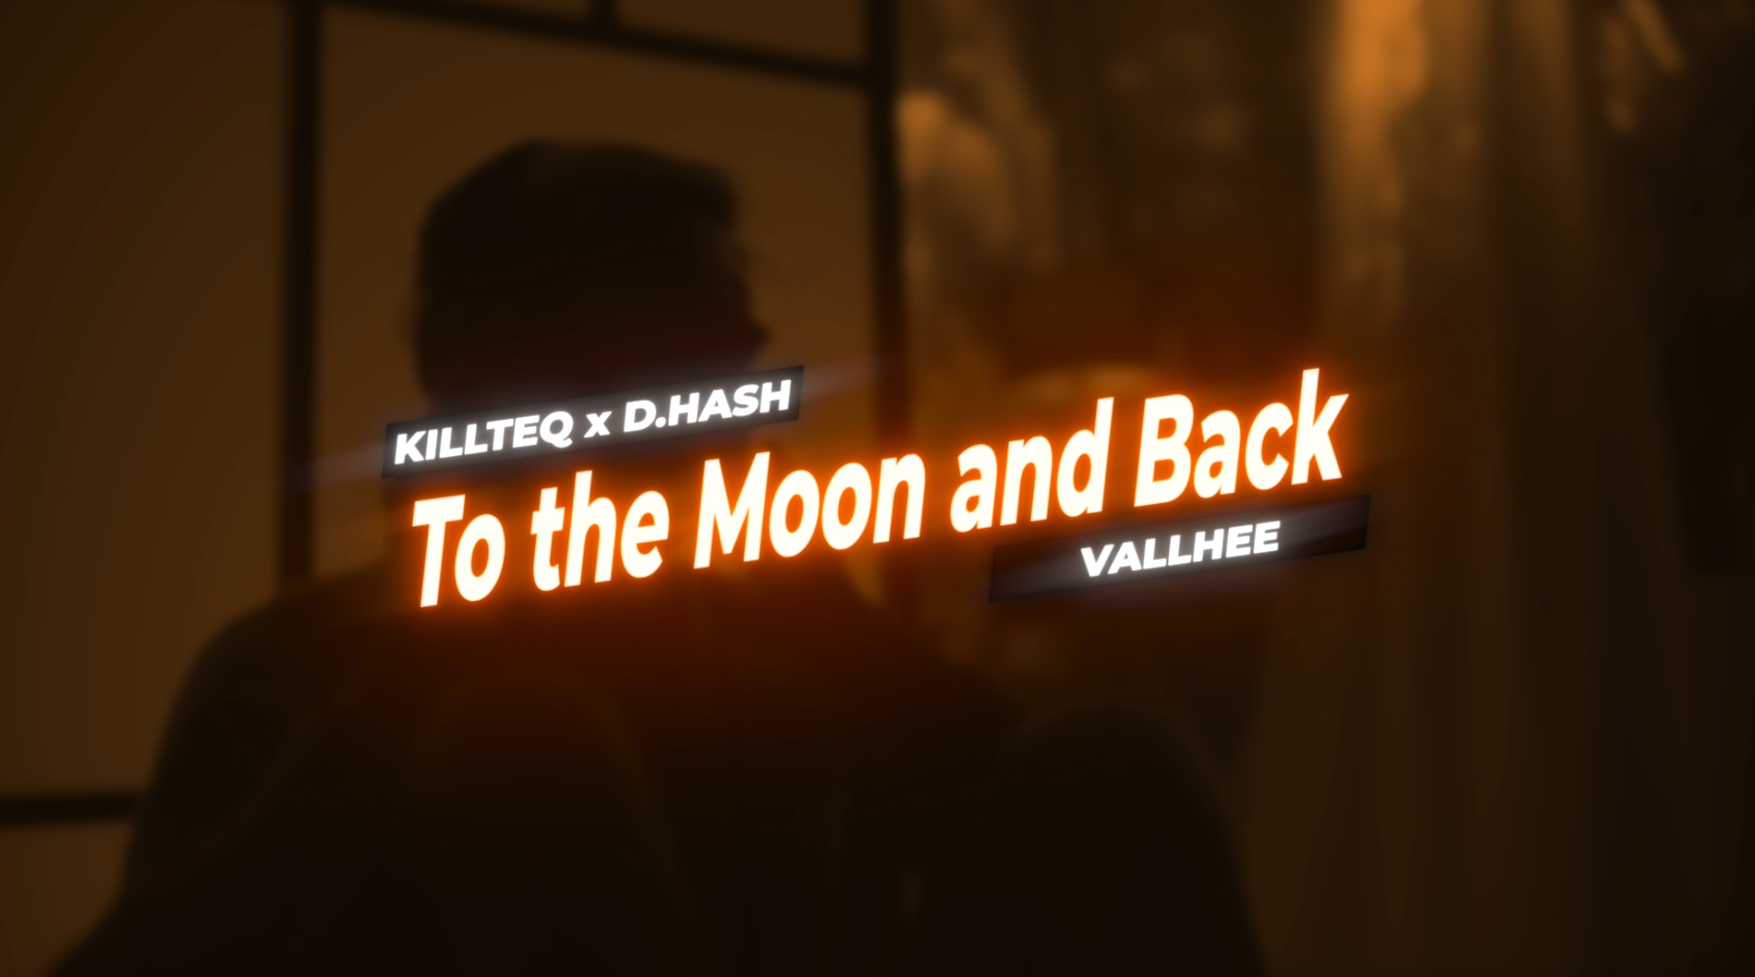 KILLTEQ x D.HASH x VALLHEE - To the Moon and Back